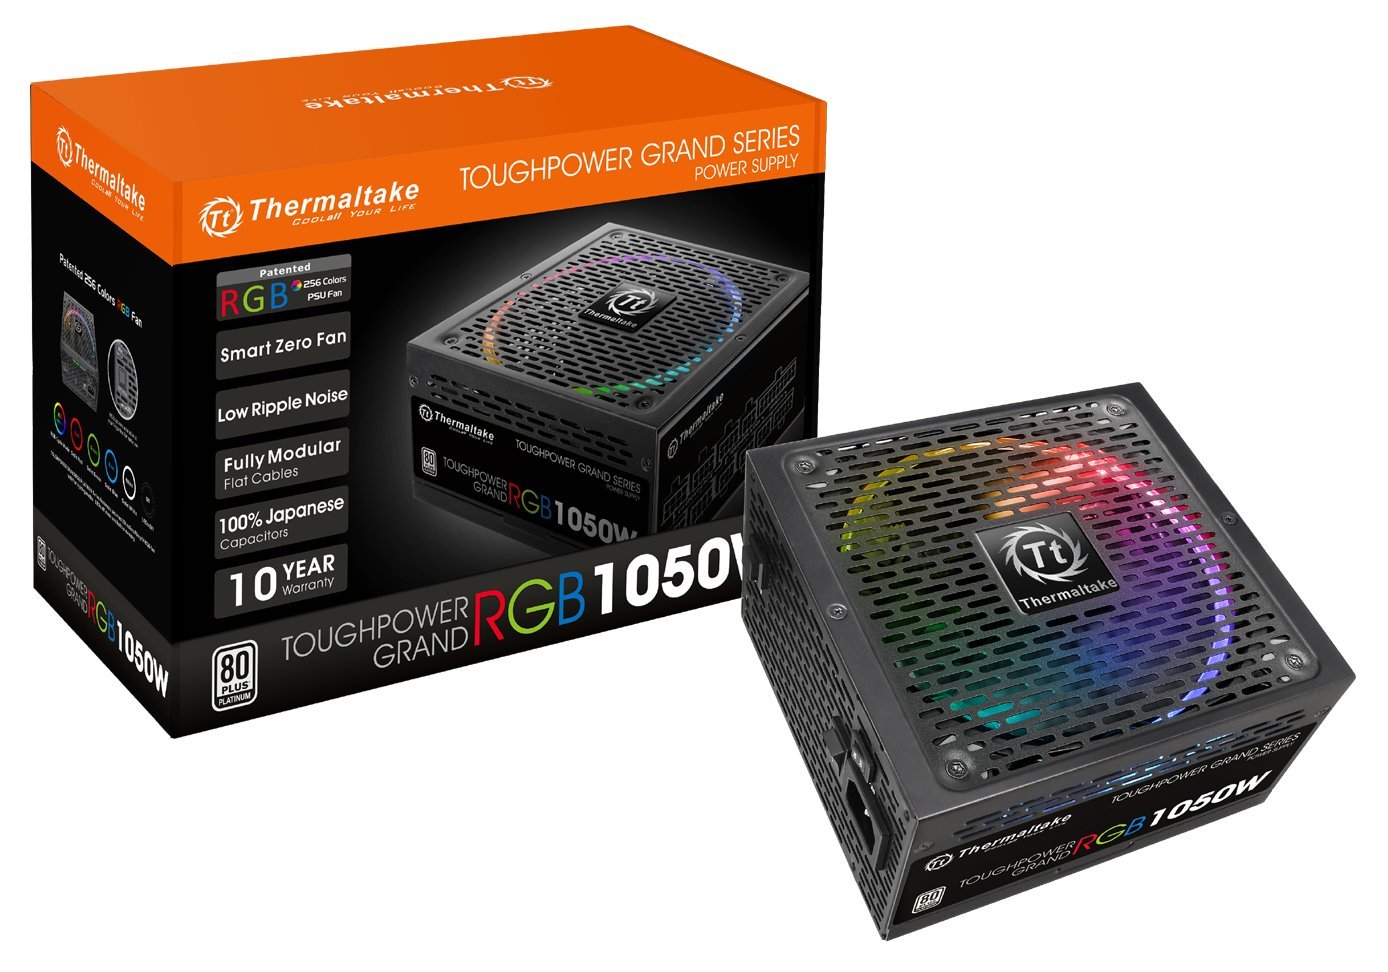 Thermaltake Toughpower Grand RGB 1050W Platinum at an angle against a white background